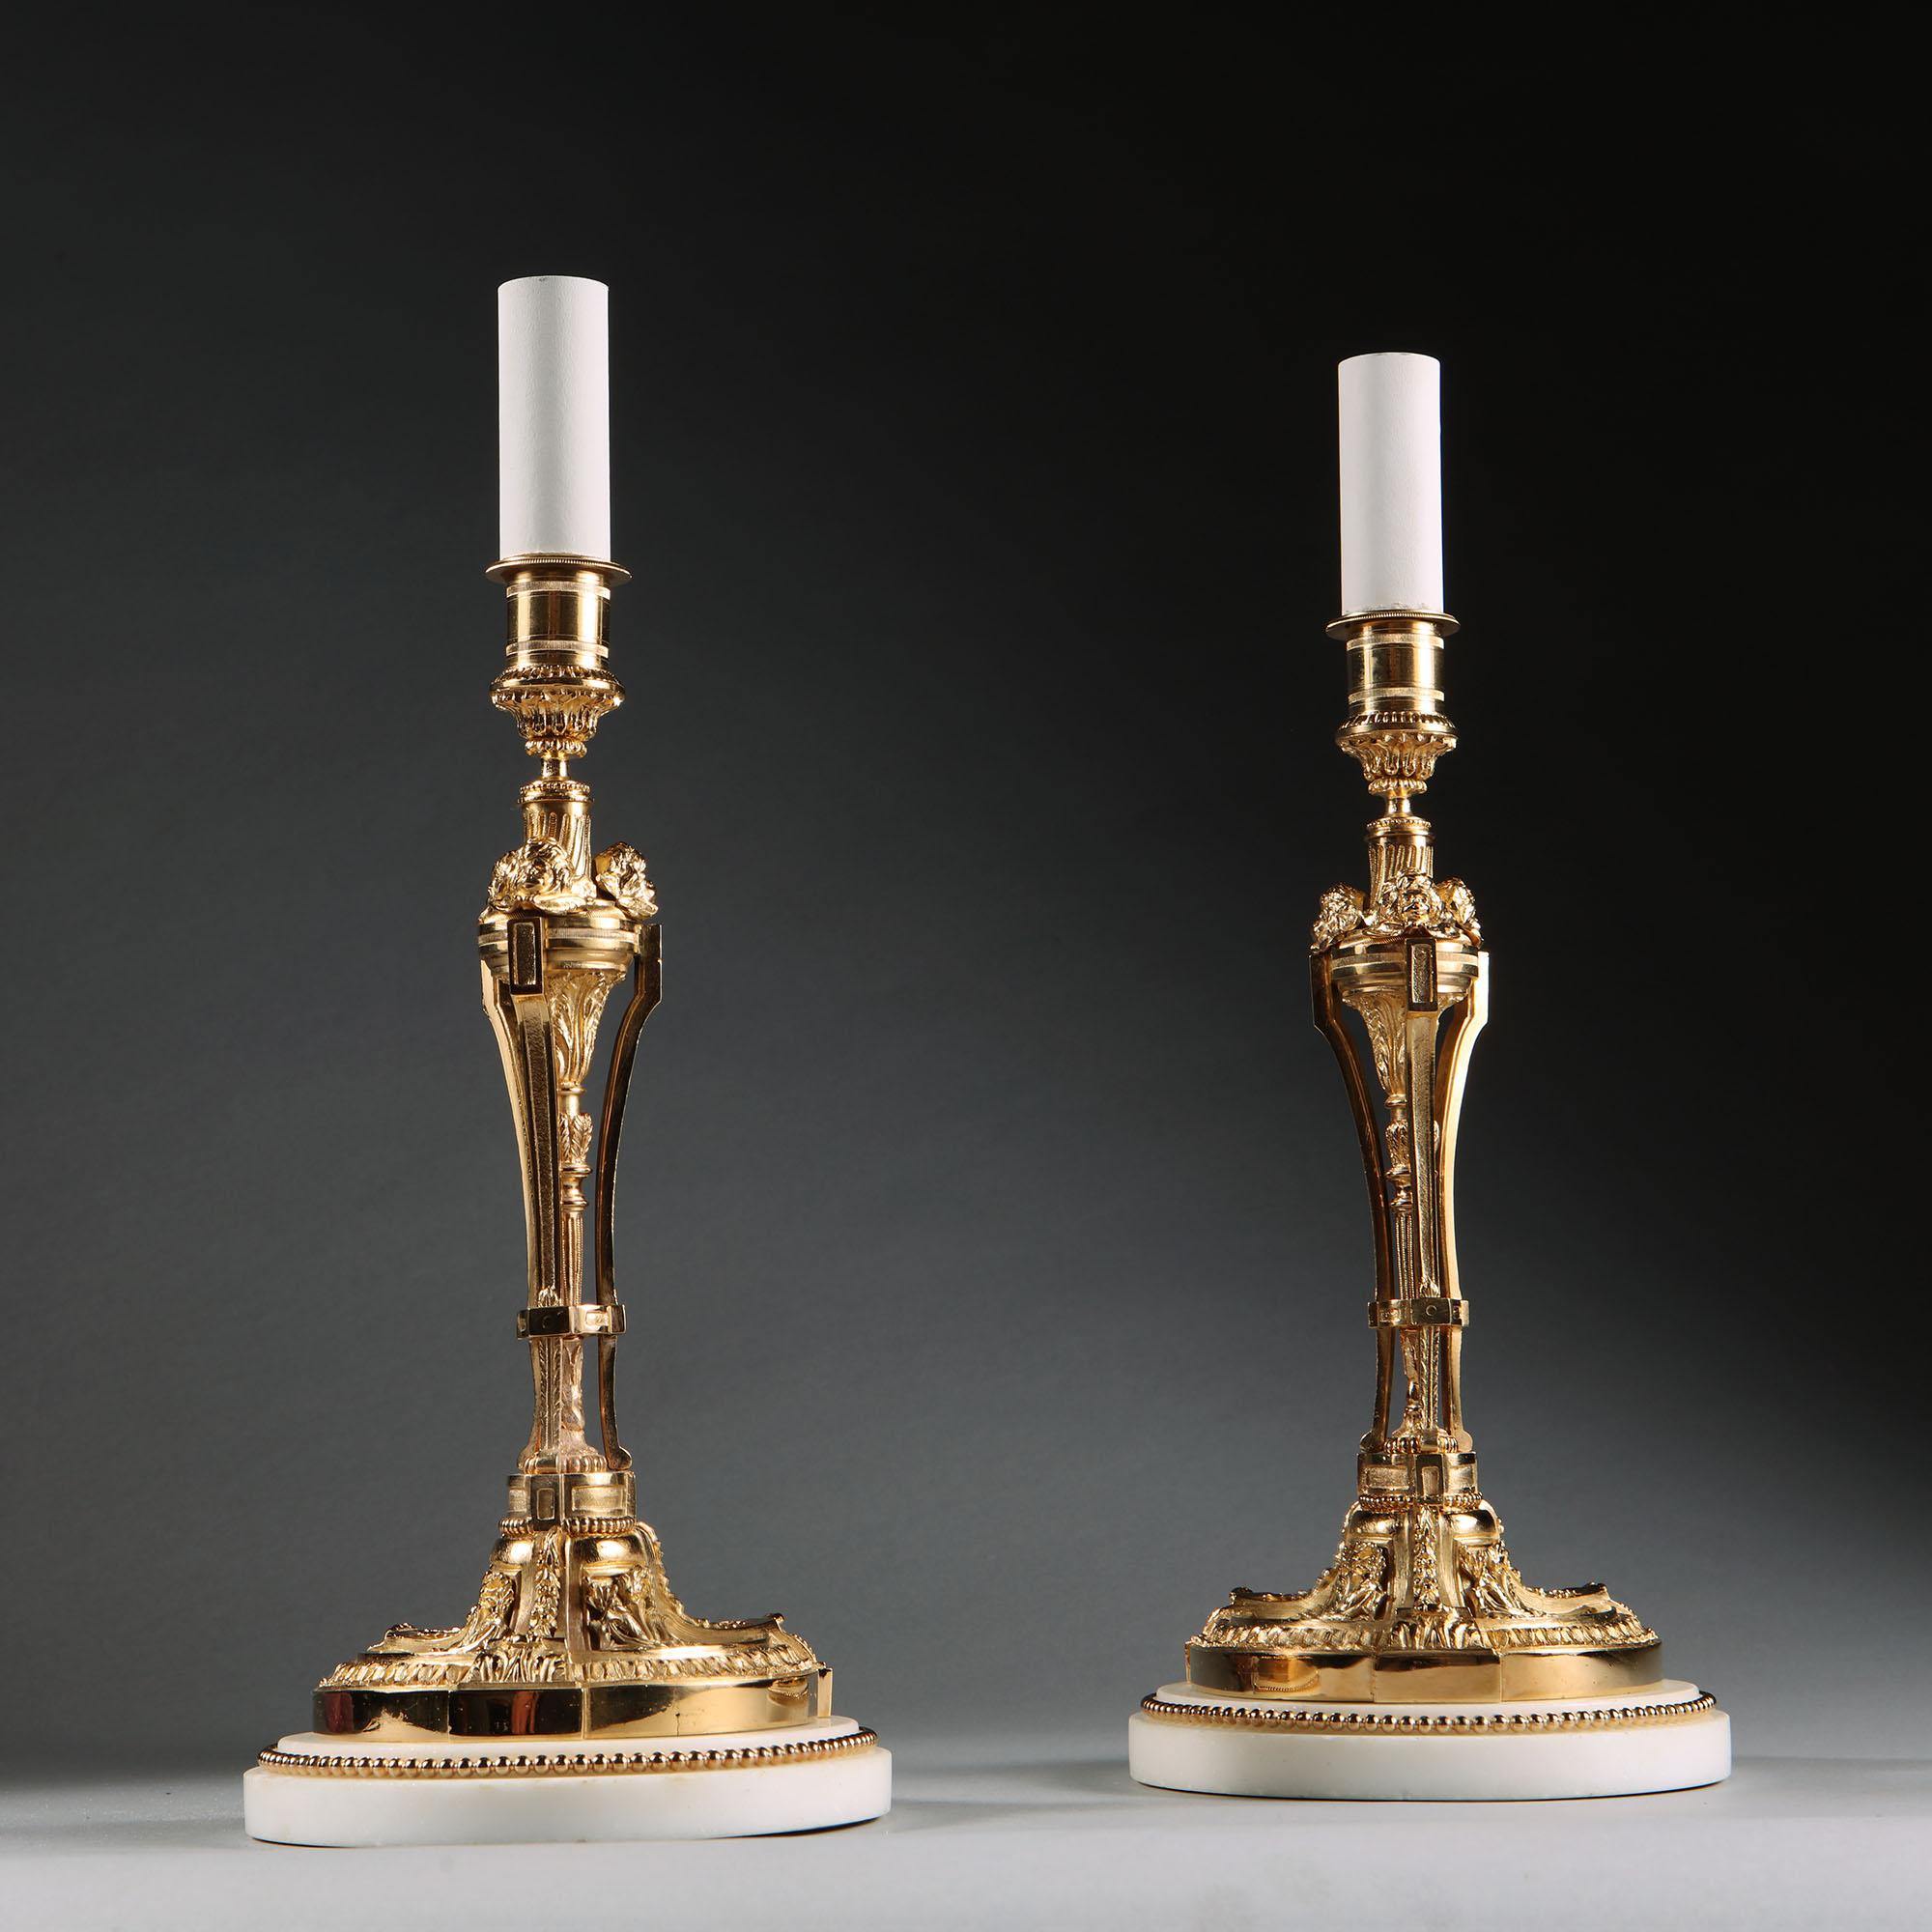 Pair of exceptionally fine late 19th-century neoclassical gilt bronze candlesticks mounted on white marble bases with gilt bead borders. Now mounted as table lamps.

France, circa 1880.

Height to the top of the gilt candlestick 12